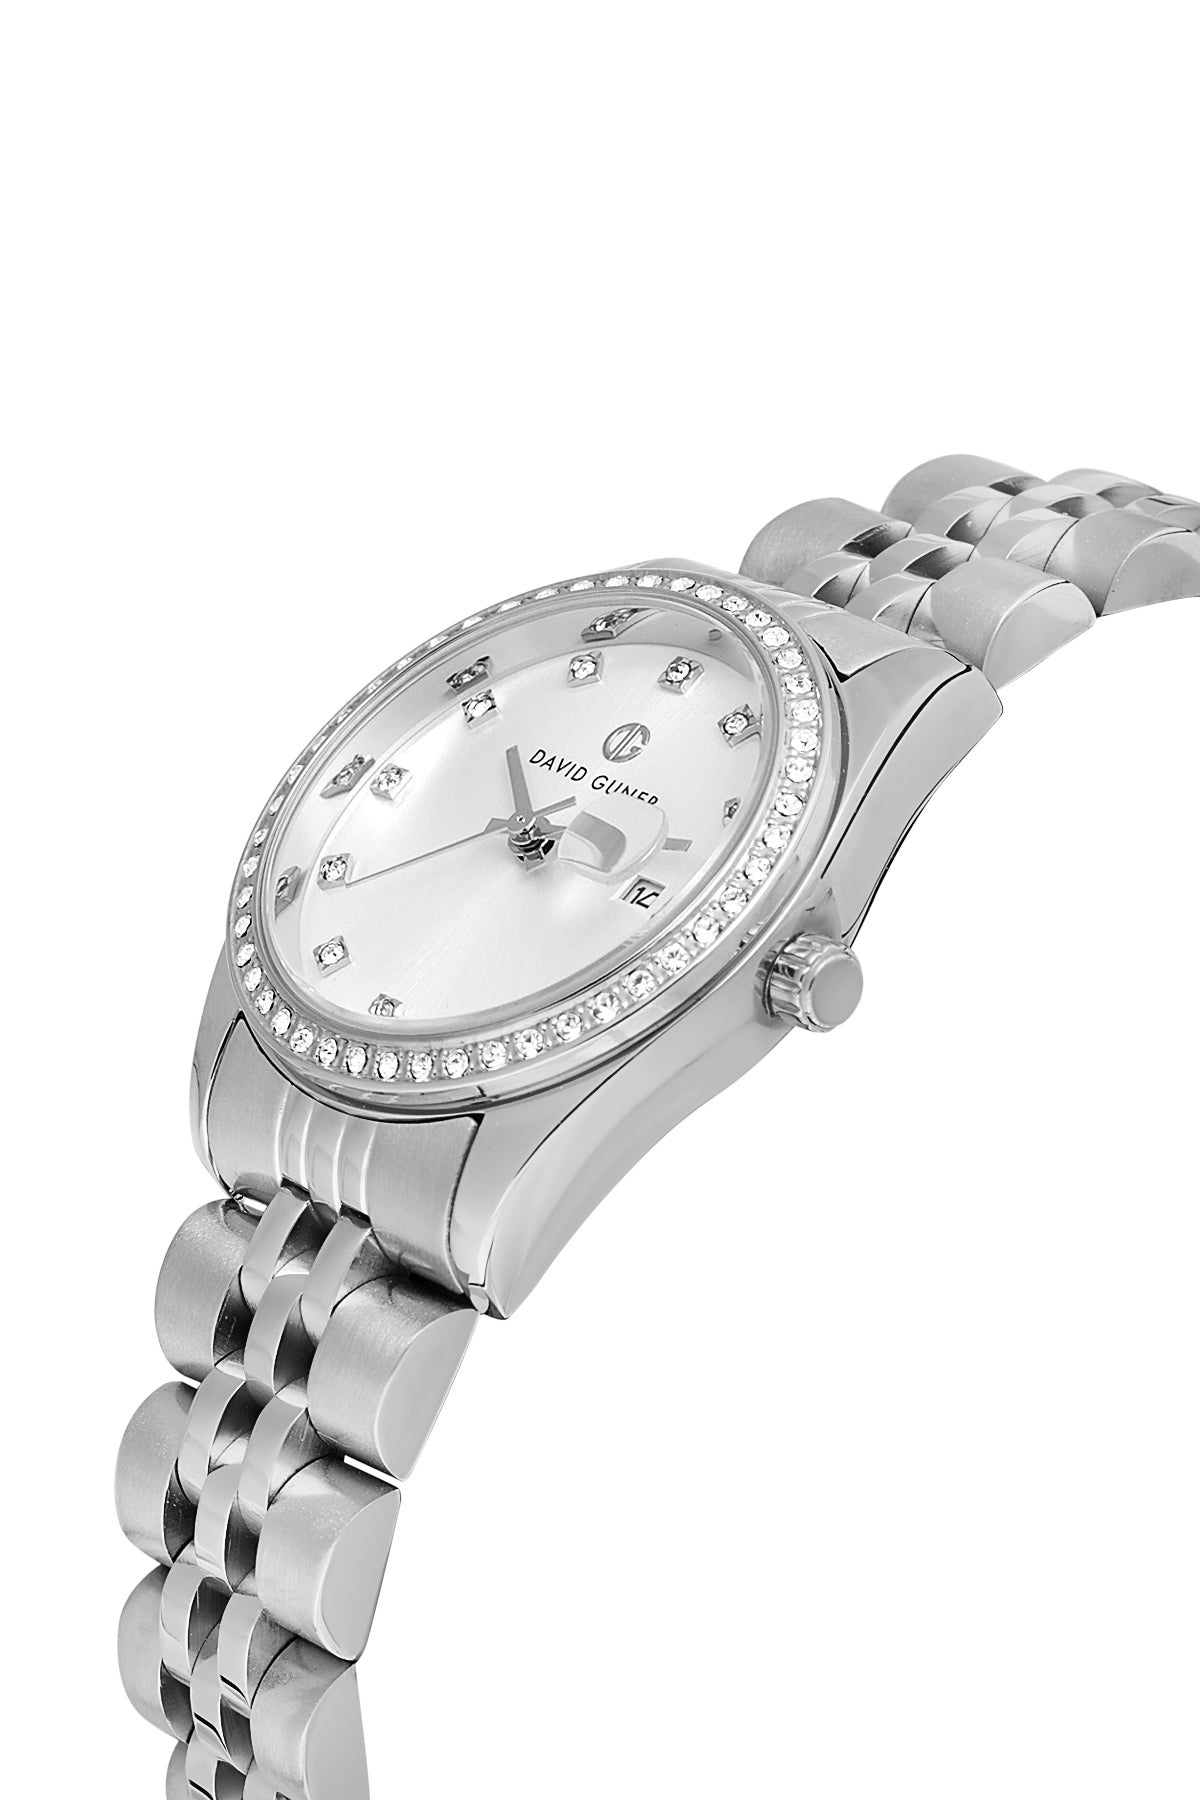 David Guner Women's Wristwatch with Silver Dial and Silver Plated Calendar